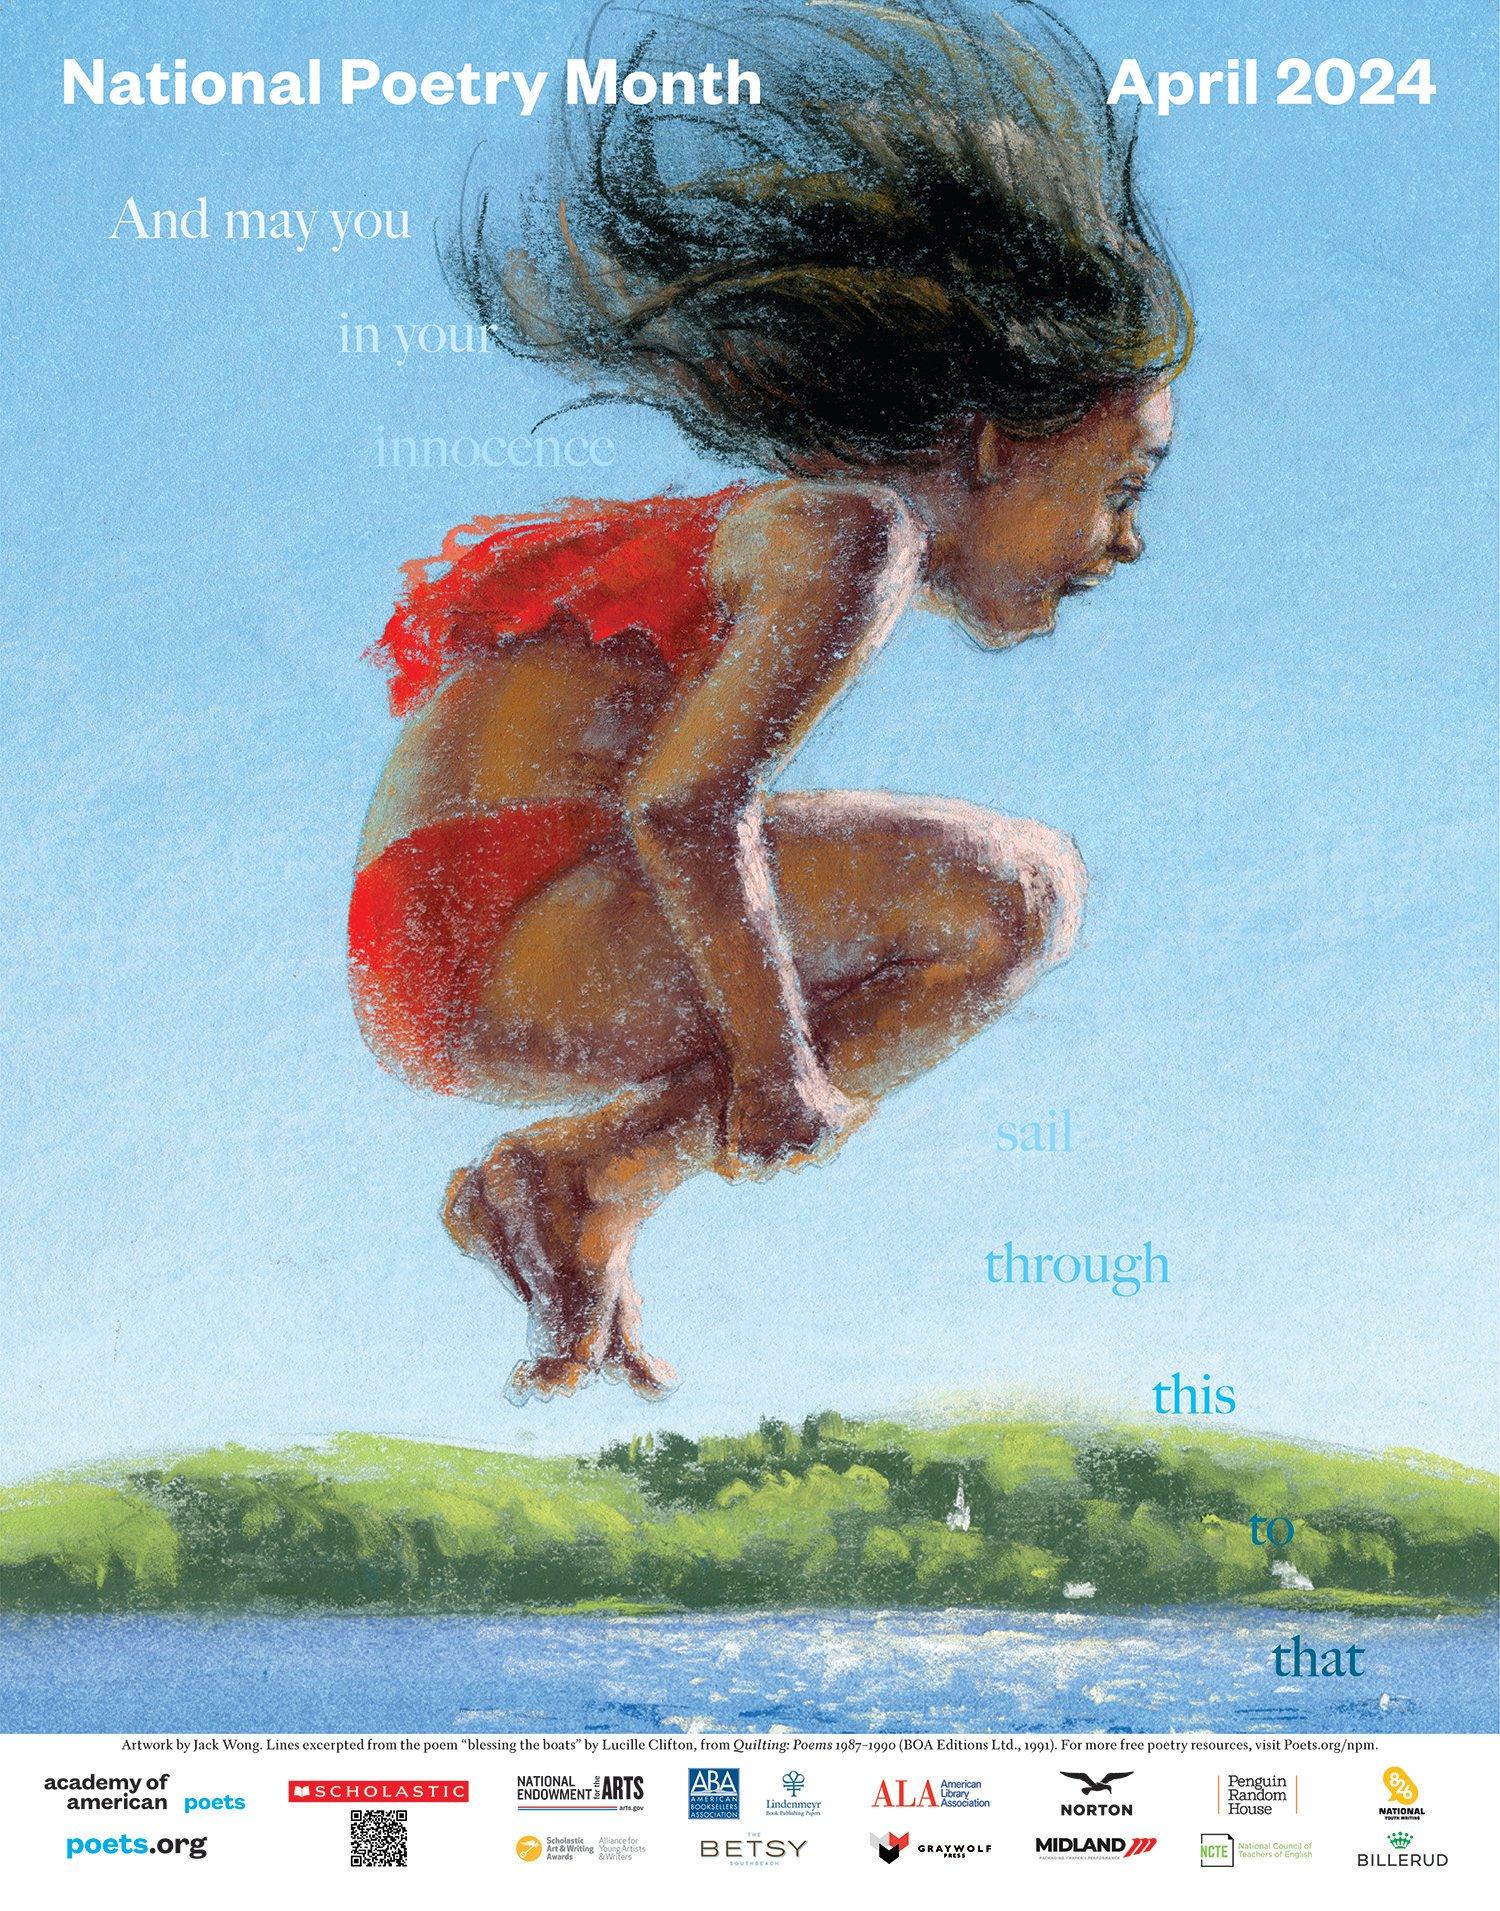 Drawing of a girl dressed in a bathing suit jumping into a lake with the title, "National Poetry Month, April 2024." The words, "And may you in your innocence sail through this and that" are superimposed over the drawing.